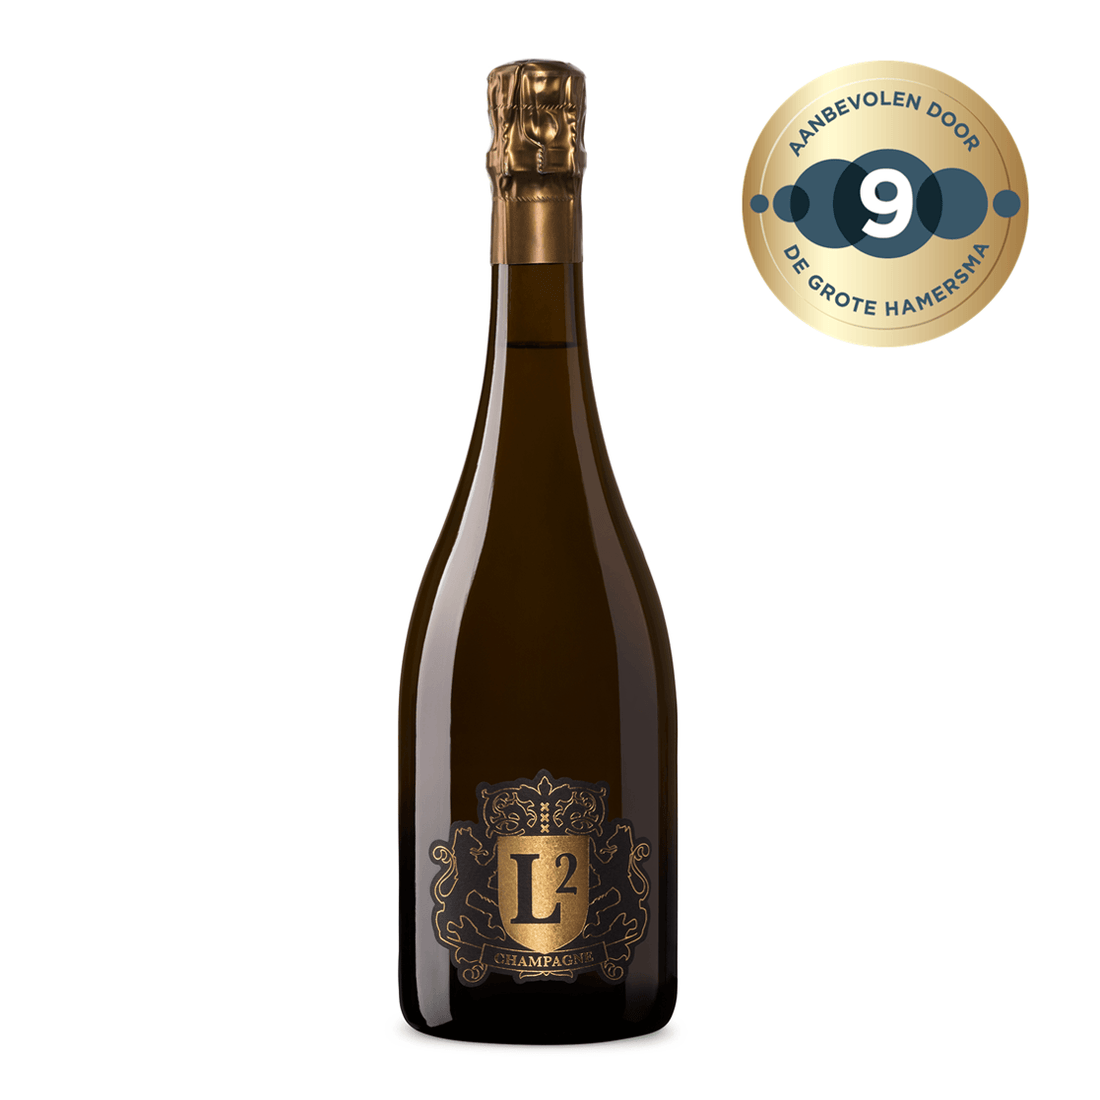 L2 Champagne Golden Lion Extra Brut|Sustainable|Ecological